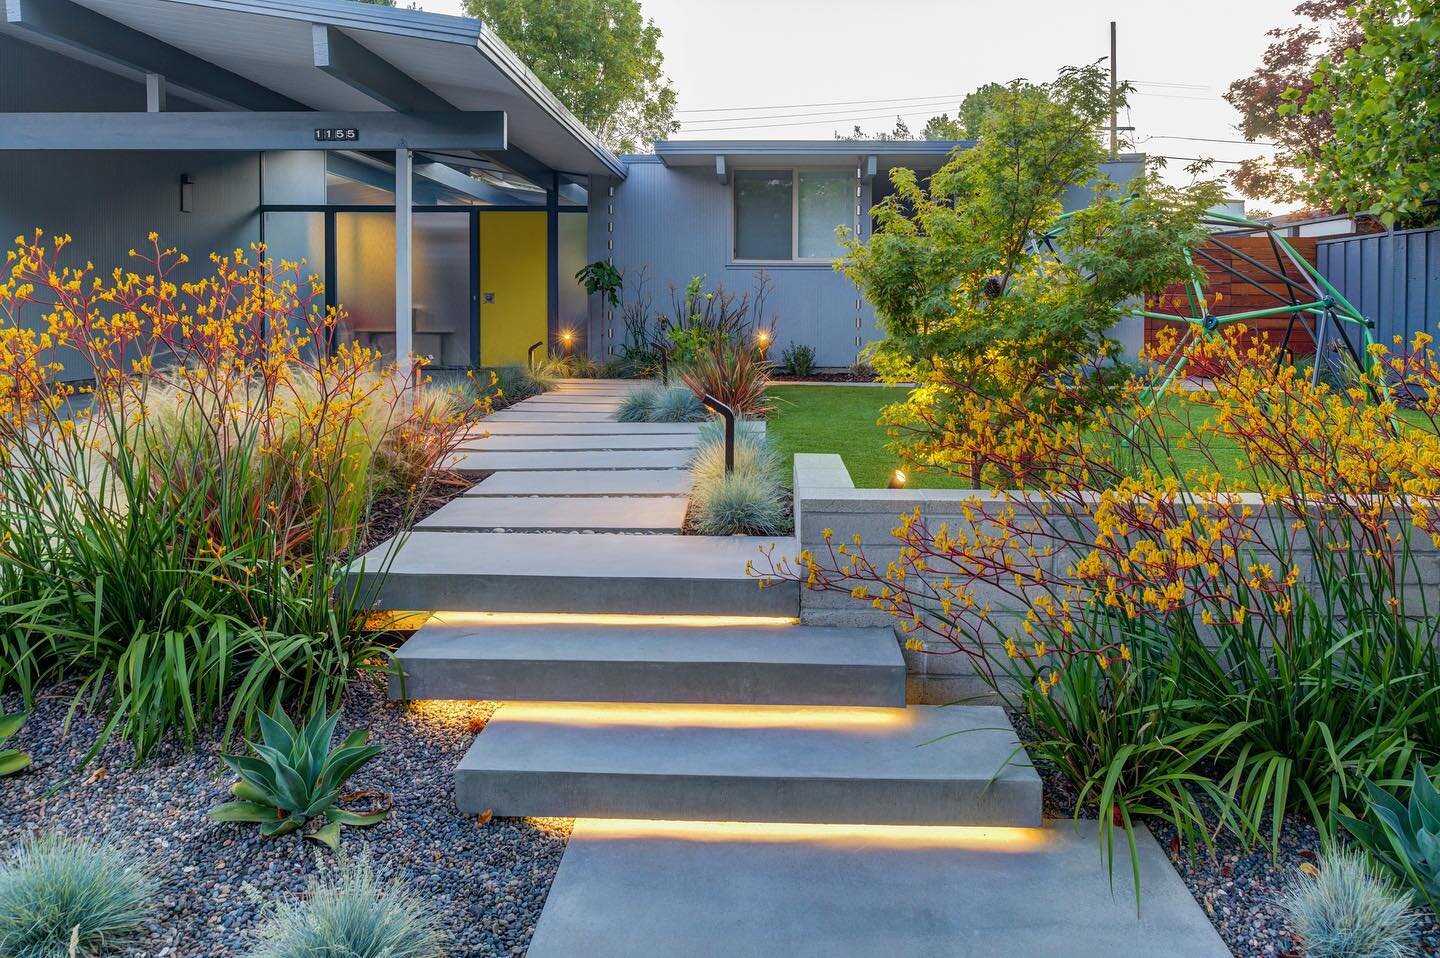 A floating concrete staircase in a mid-century modern Eichler house exudes style and personality. 🏡😏
&bull;
&bull;
&bull;
&bull; 📷 @trevejohnsonphotography 
&bull; LA: @canopydesignstudios 
&mdash;&mdash;&mdash;&mdash;&mdash;&mdash;&mdash;&mdash;&